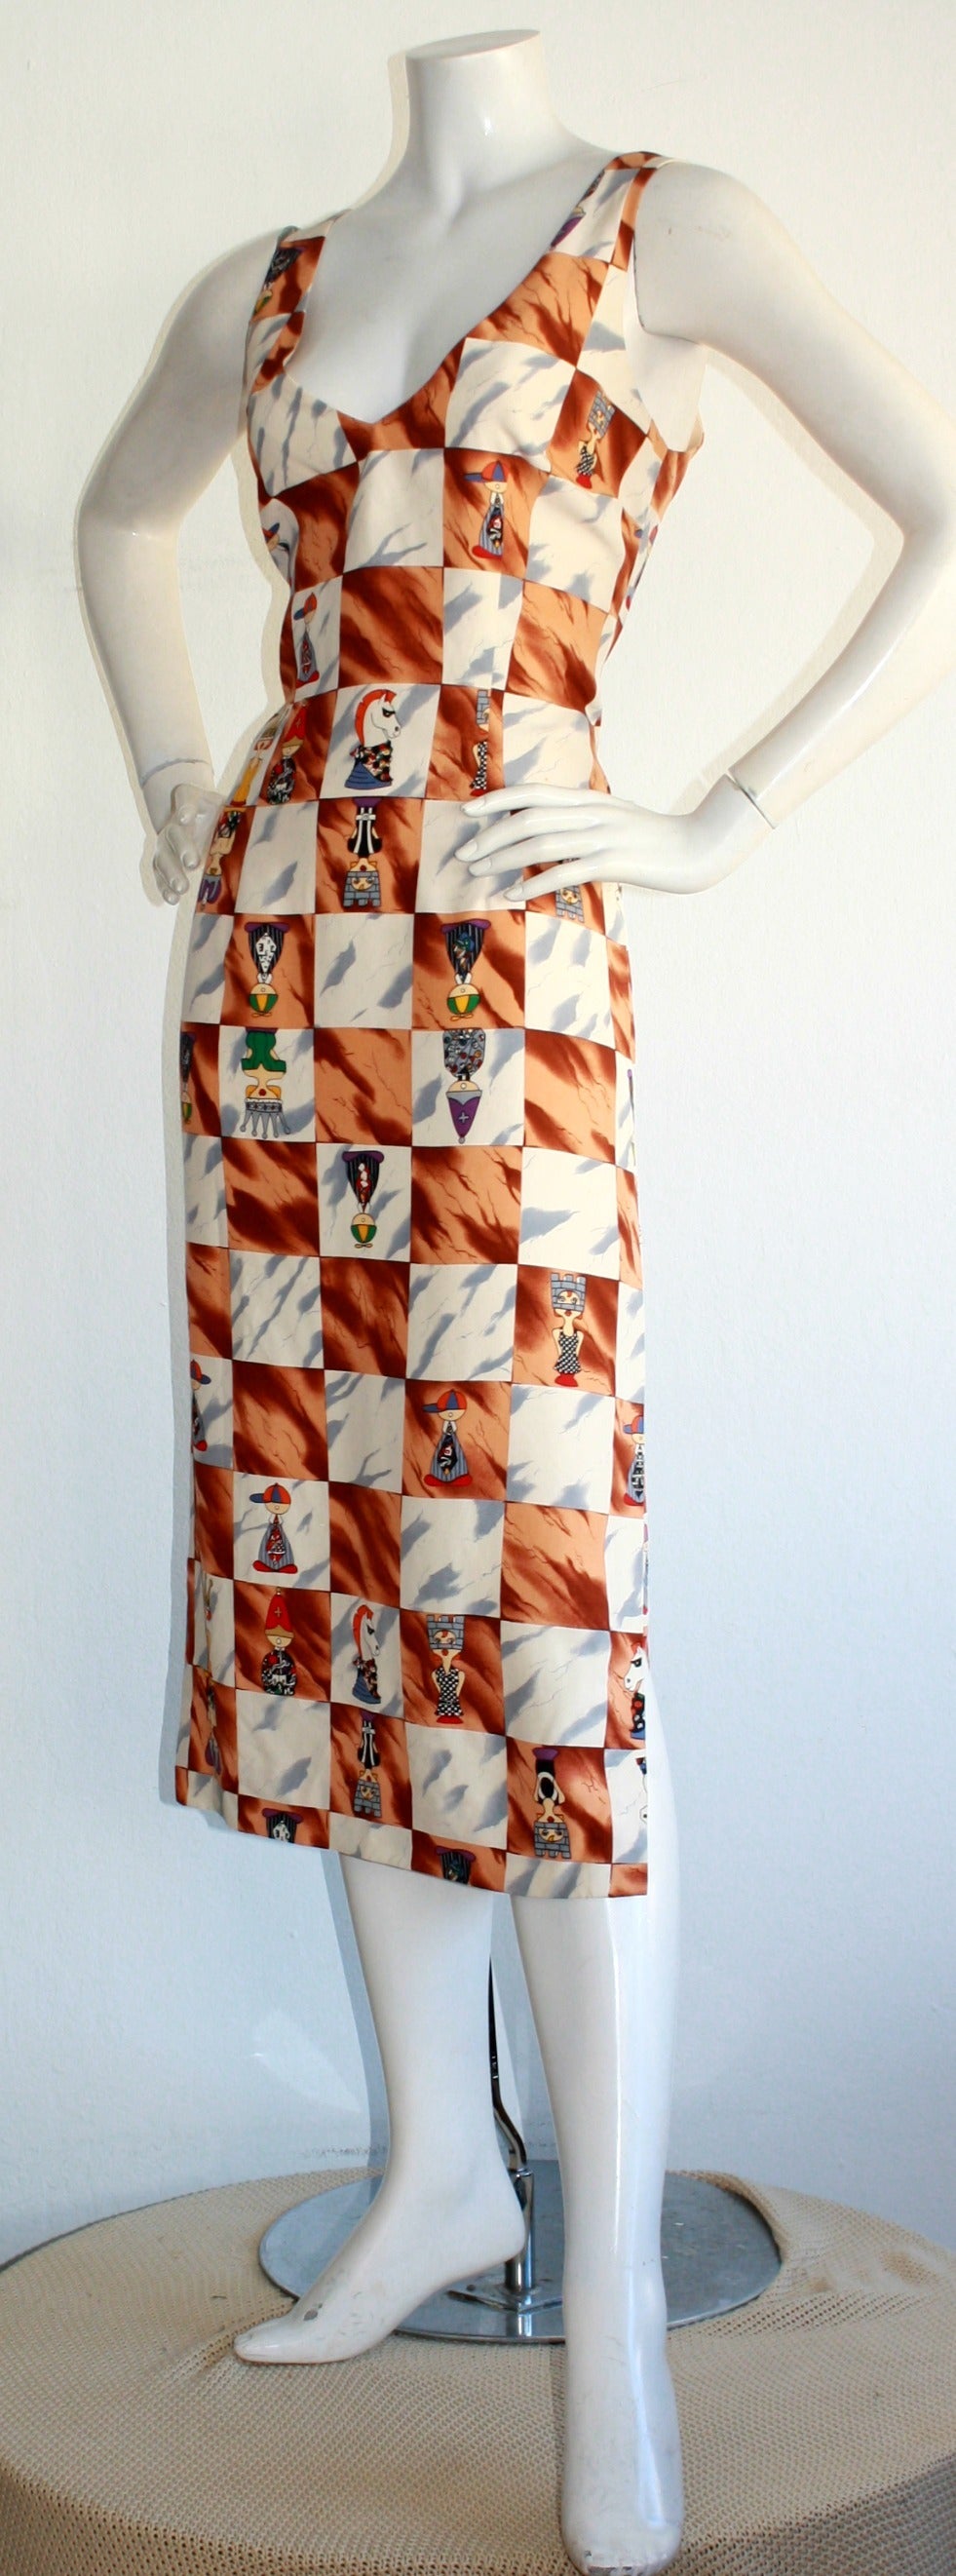 Unique, yet sexy vintage Nicole Miller dress! Flattering body-hugging (in all the right places). Beautiful dipped opening in the back. Amazing pattern of characters as Chess pieces. 100% Silk. Fully lined. Made in USA. In great condition. Marked